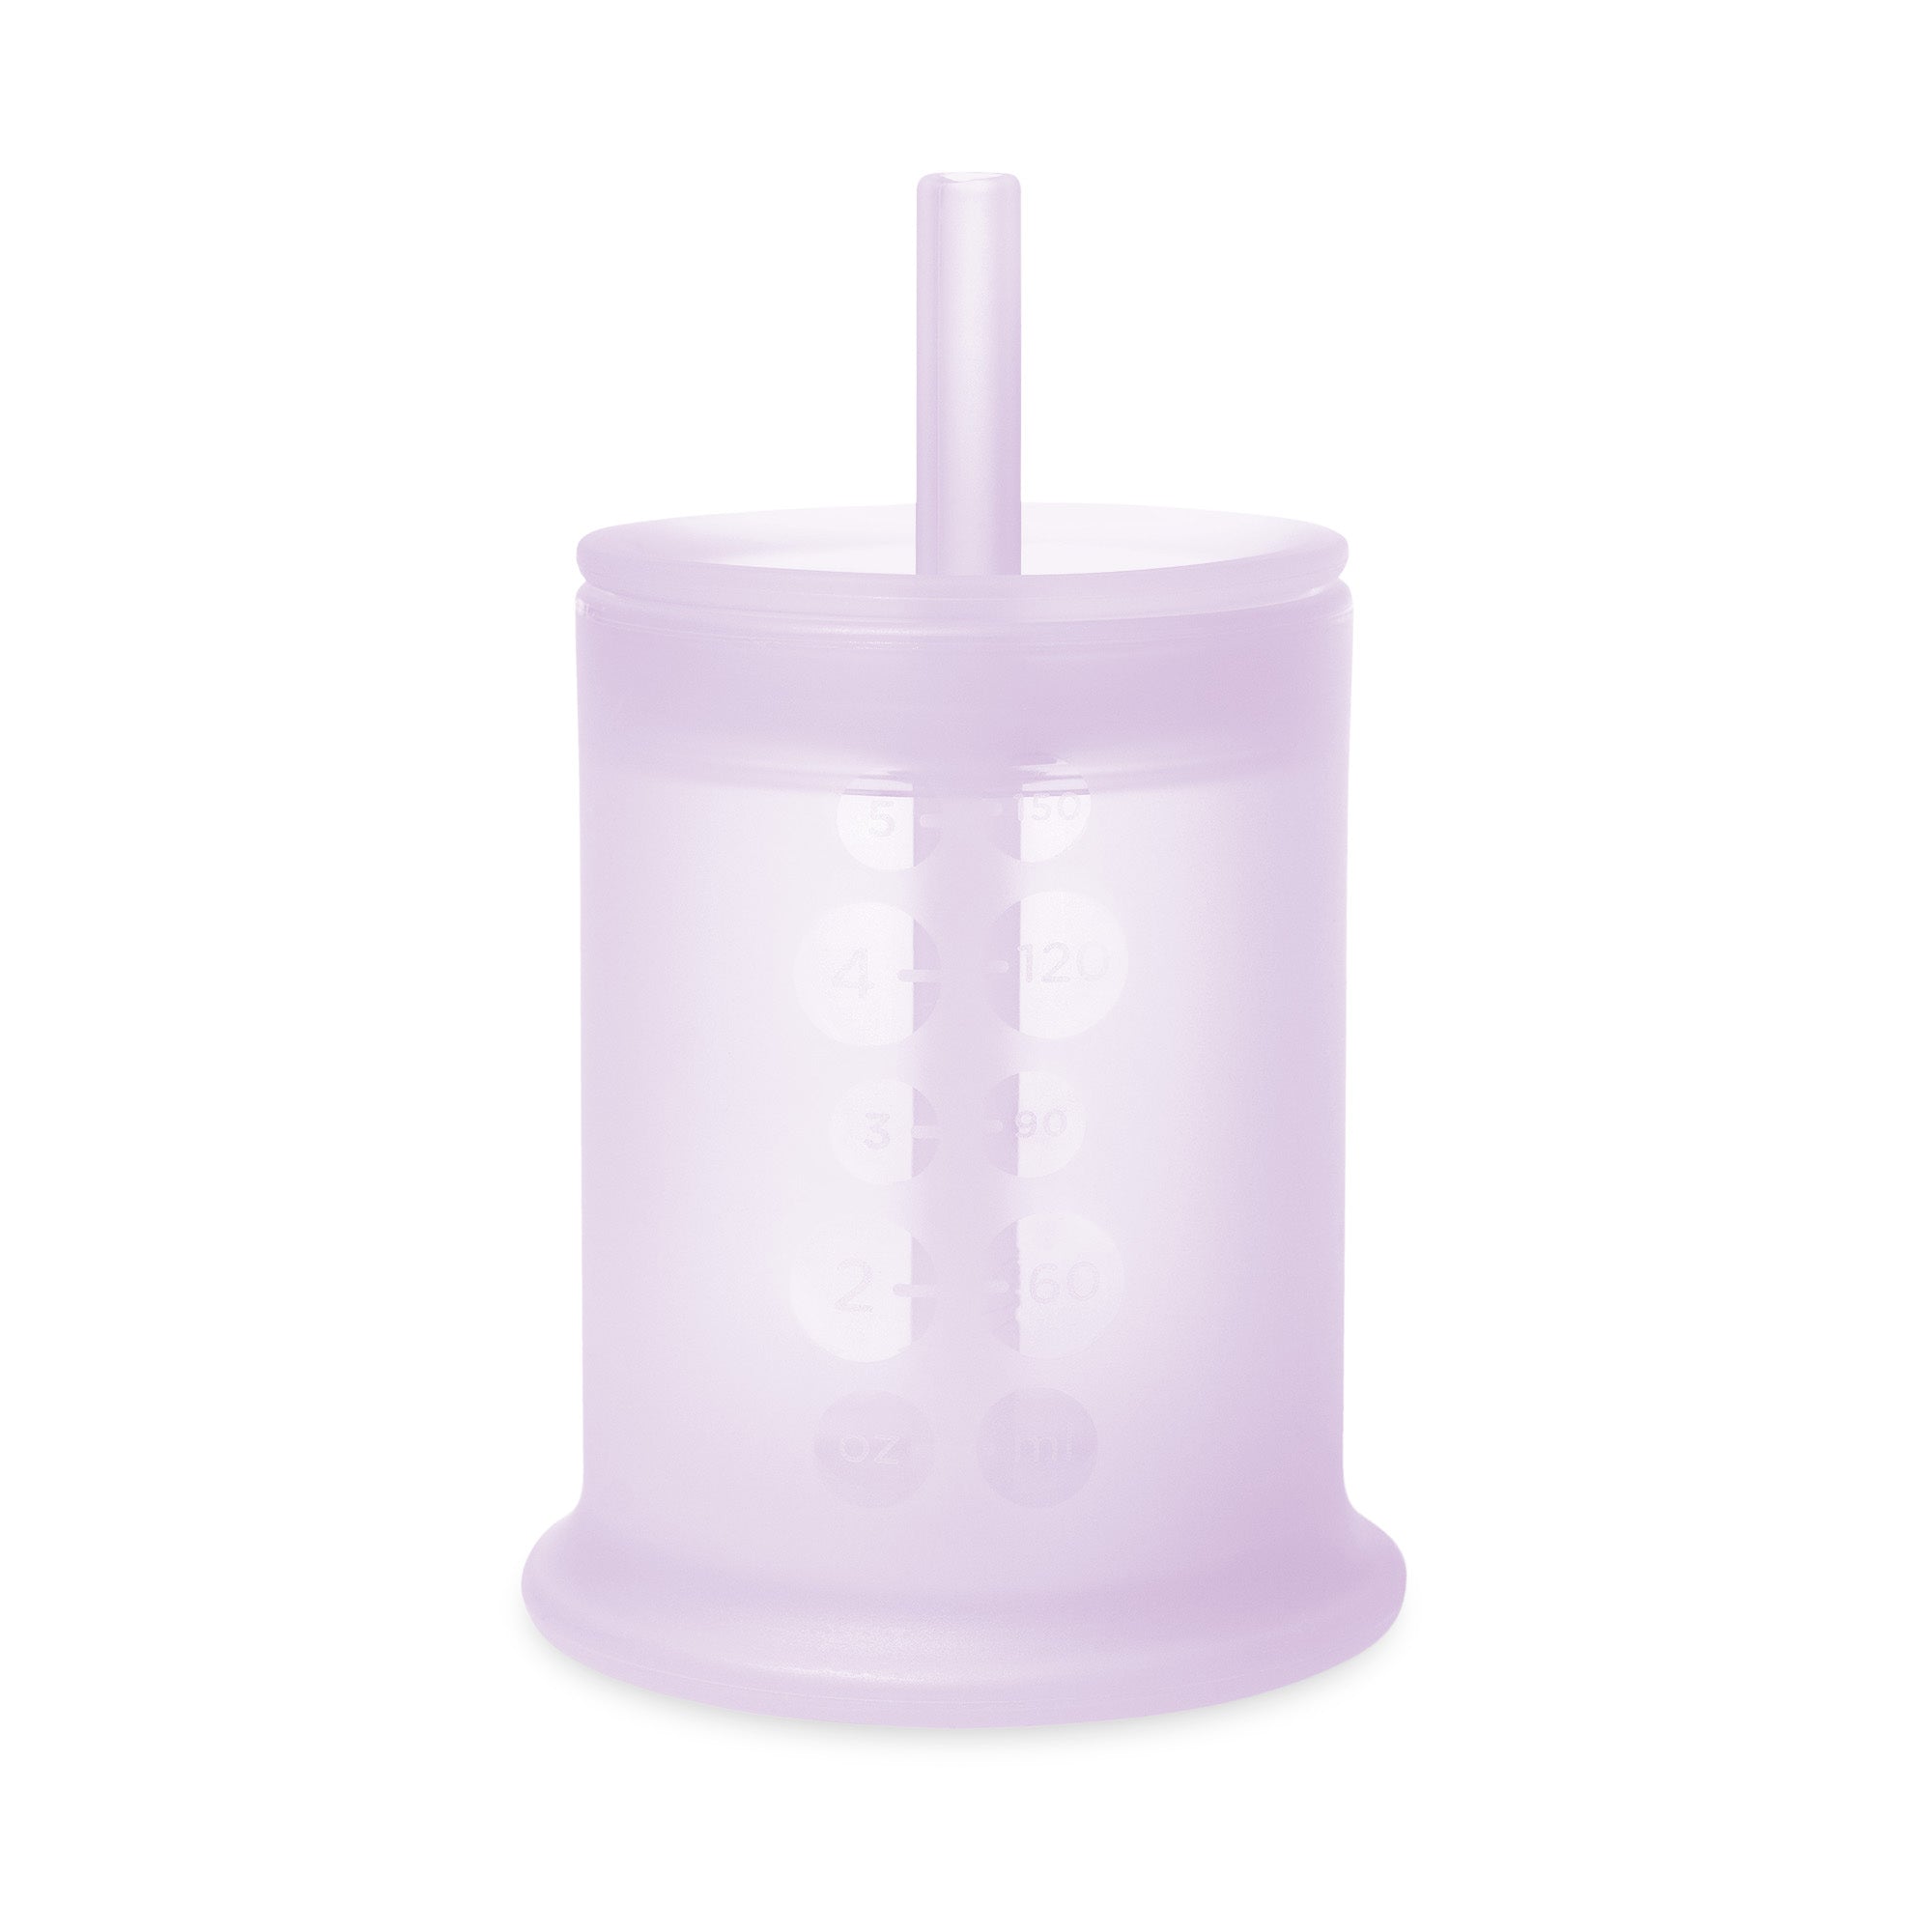 Replacement Sippy Cup Straws for your Toddler Training Cups